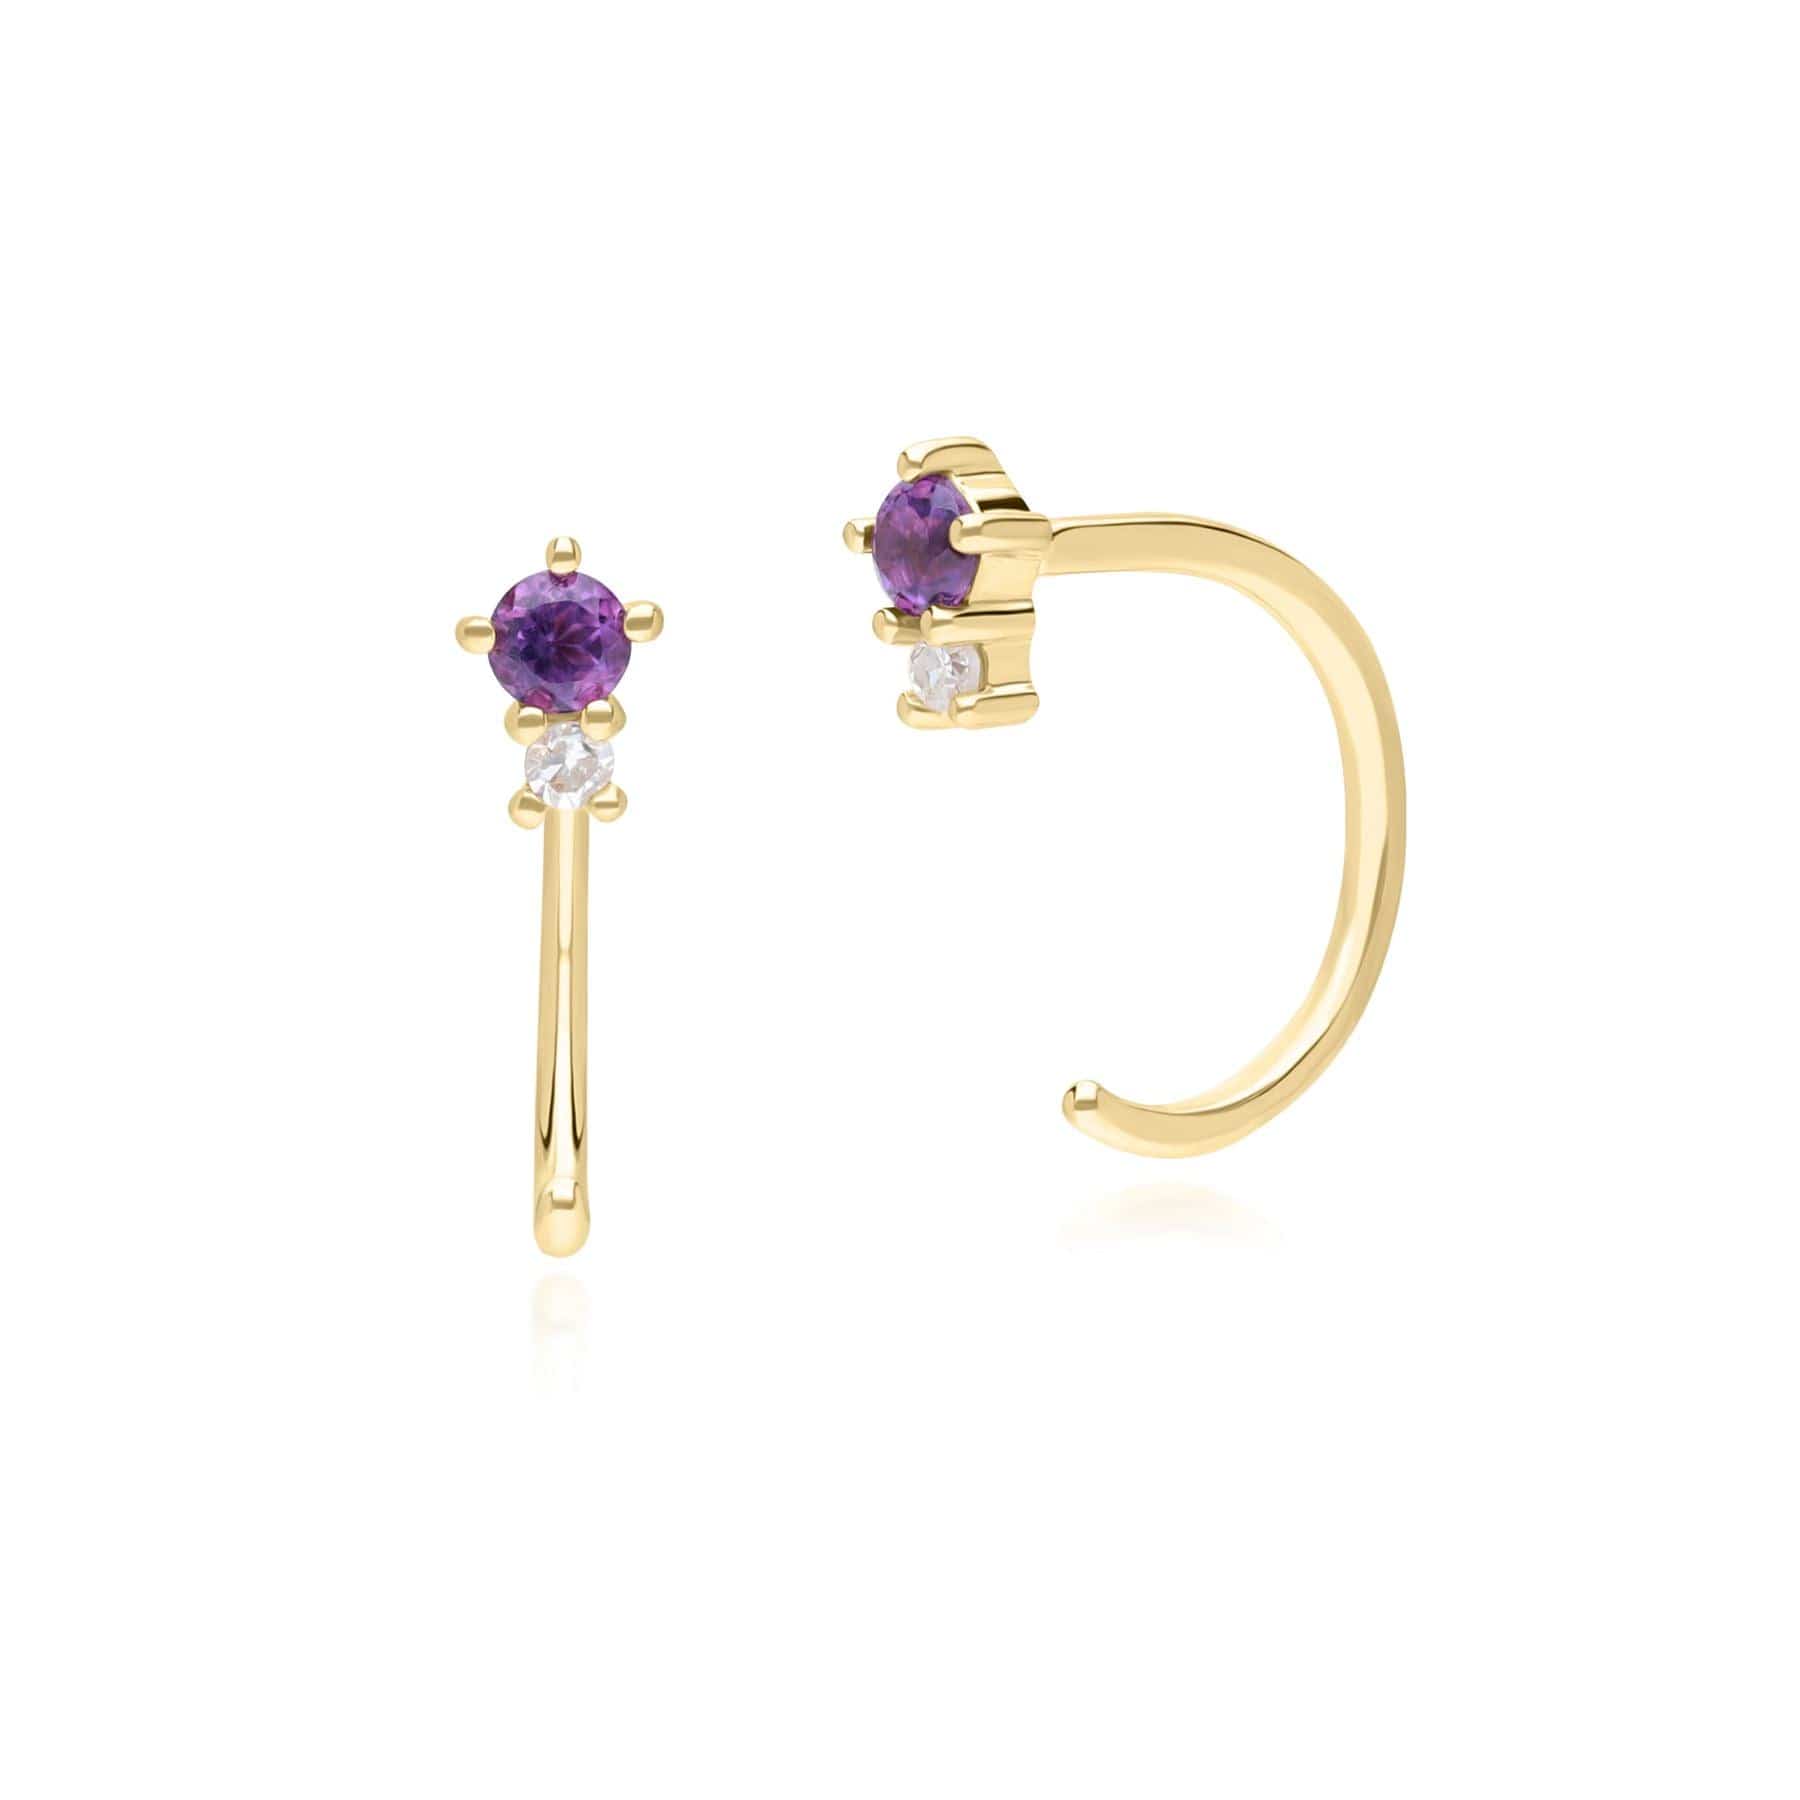 Image of Modern Classic Amethyst & Diamond Pull Through Hoop Earrings in 9ct Yellow Gold